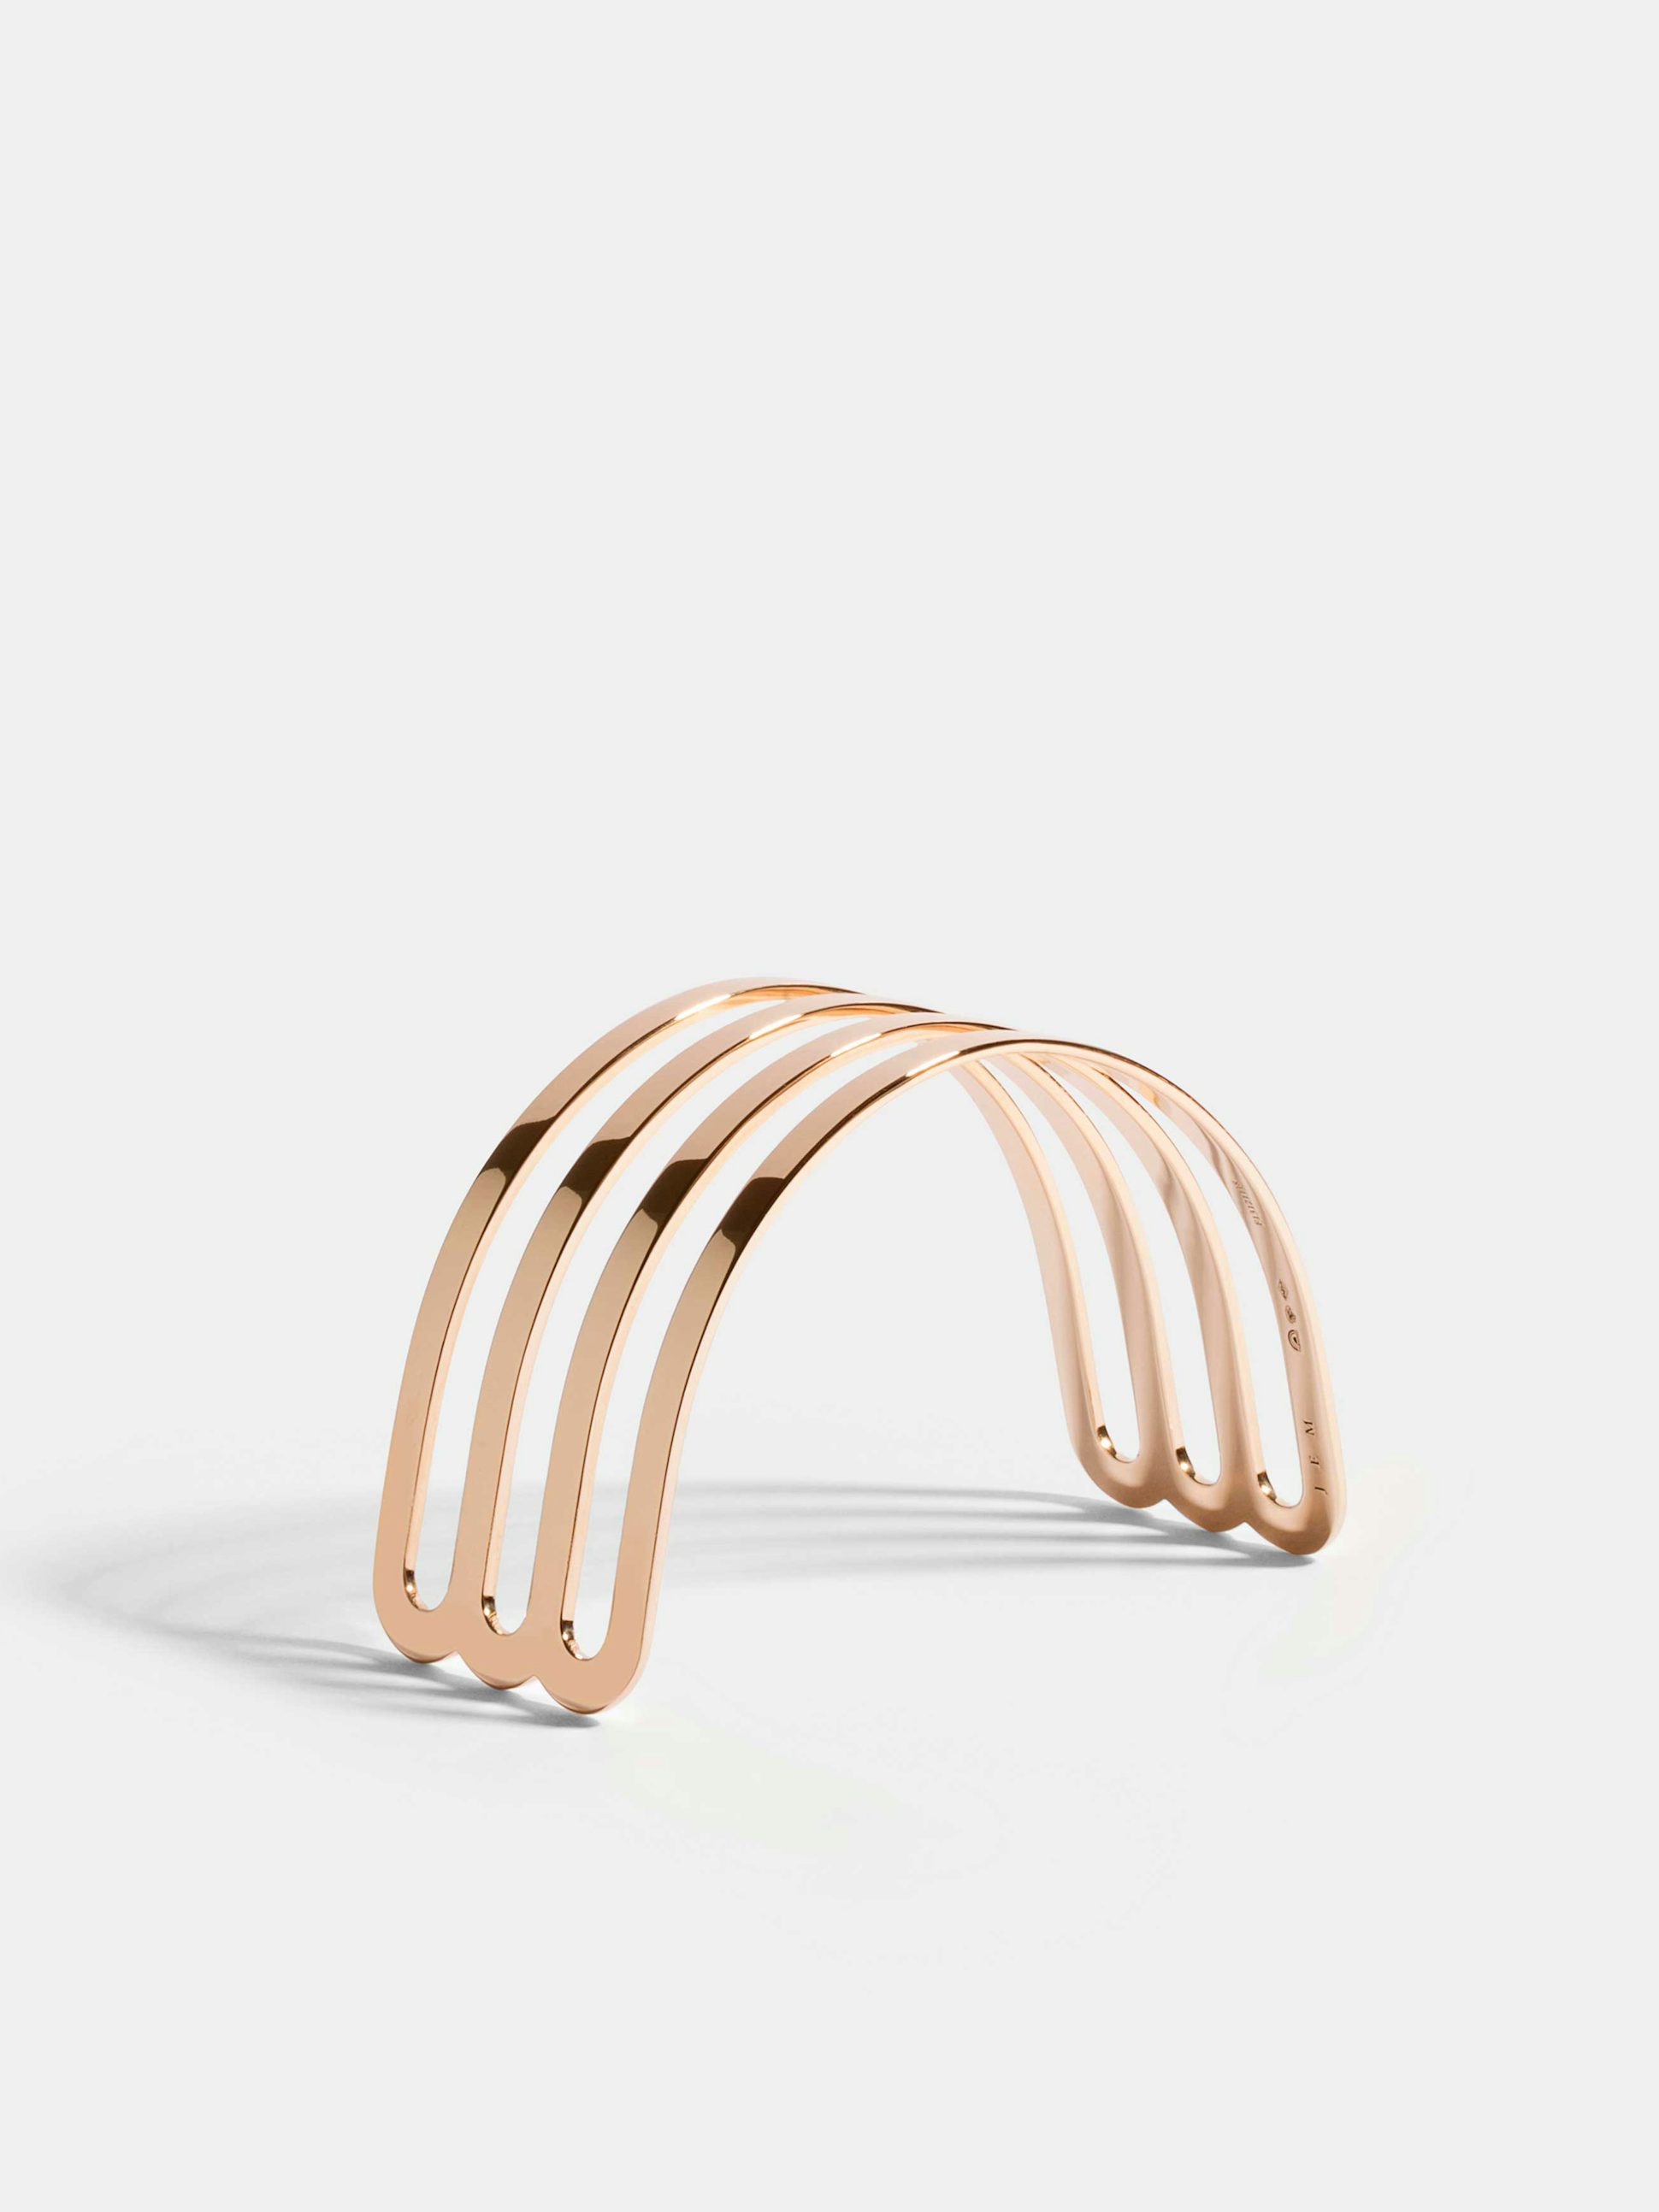 Étreintes triple half-bracelet in 18k Fairmined ethical rose gold with a polished finish.